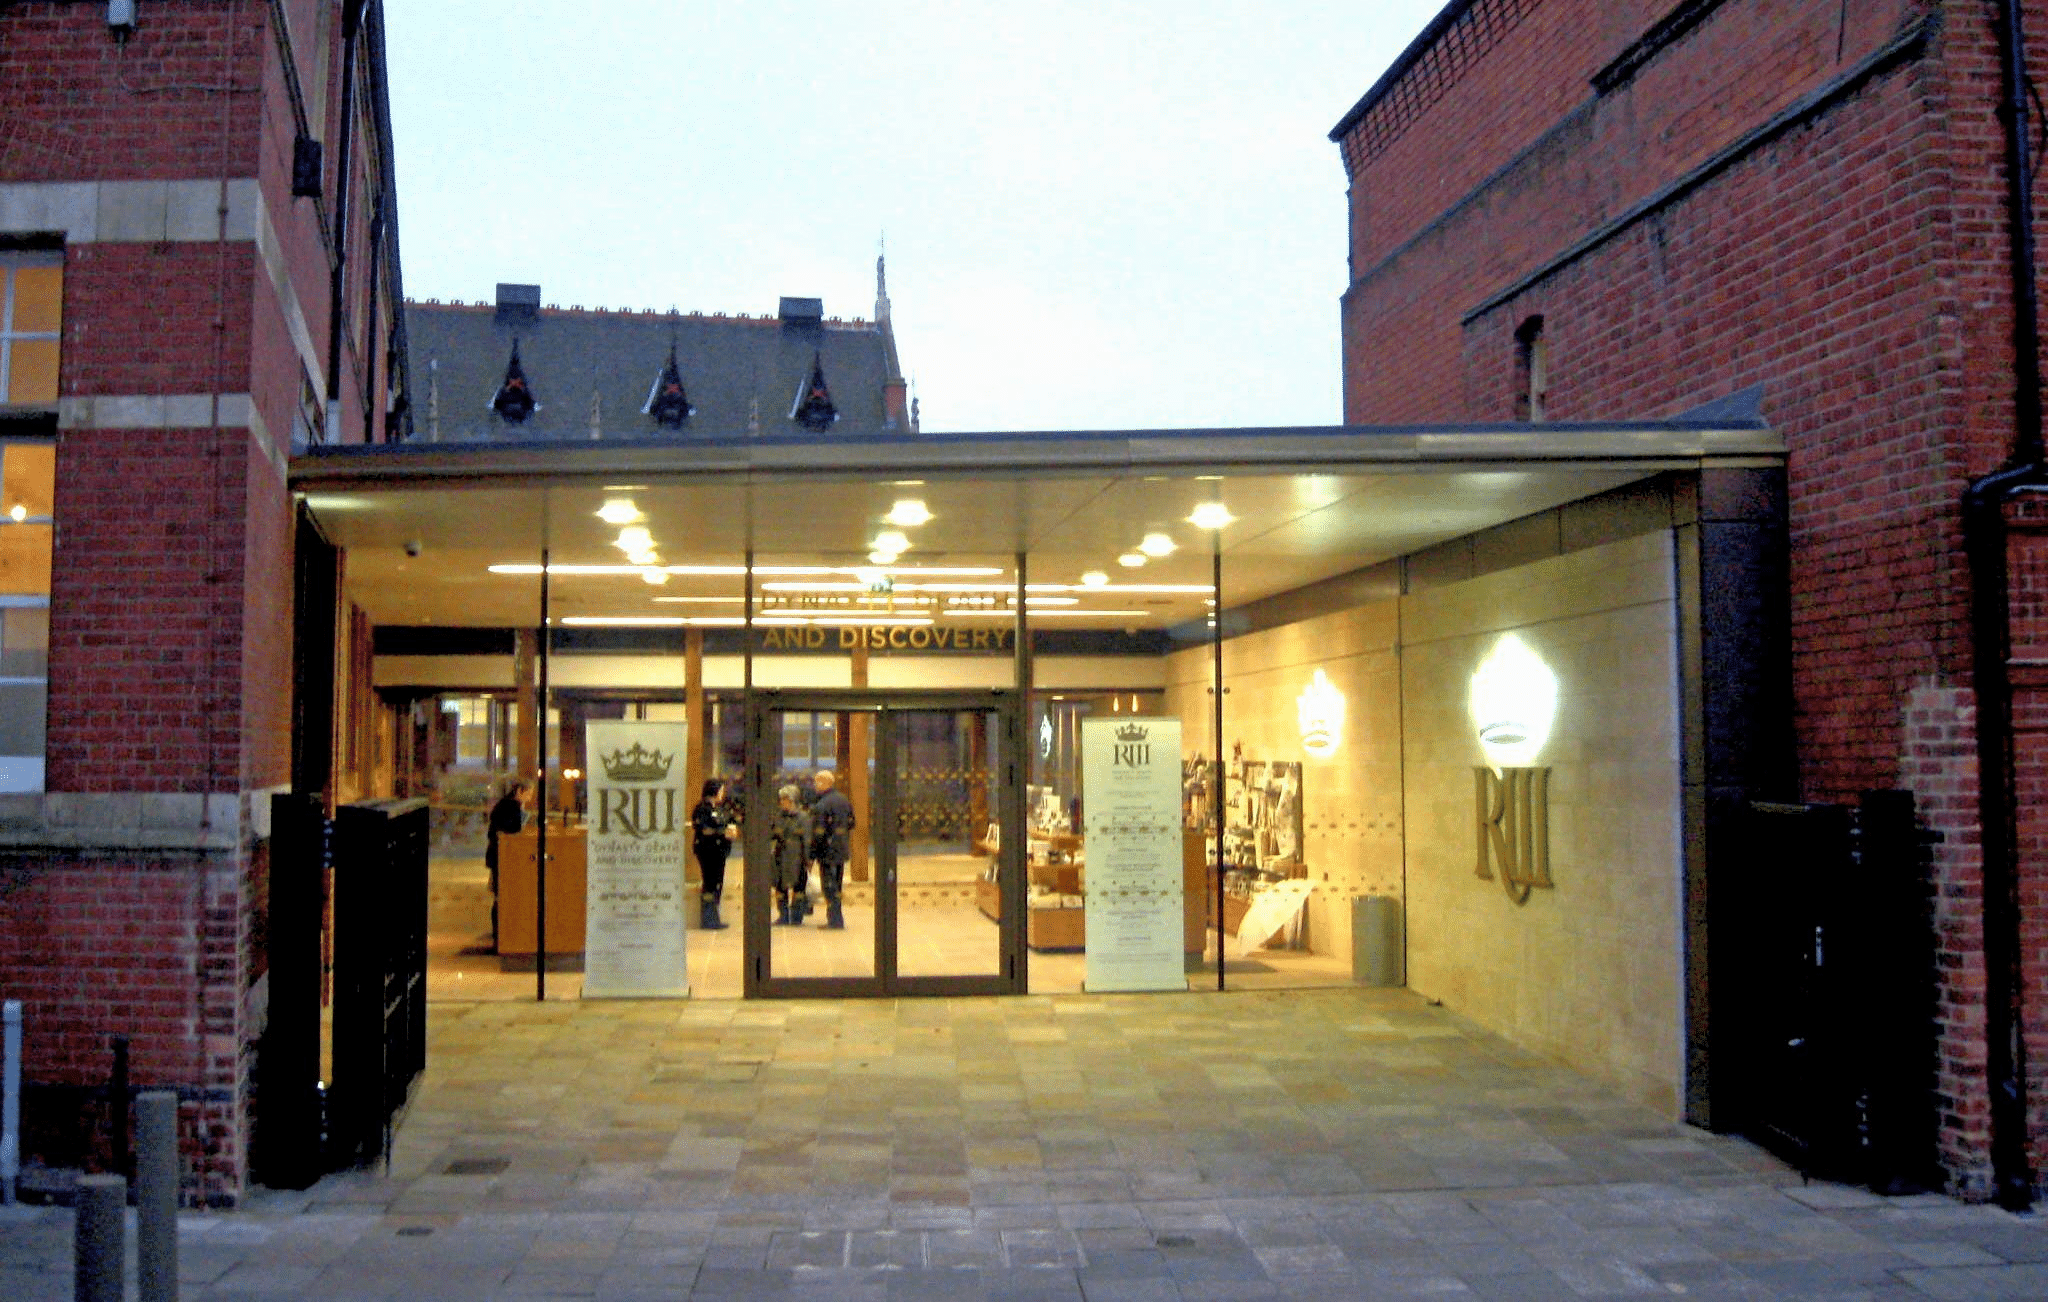 King Richard III Visitor Centre Overview